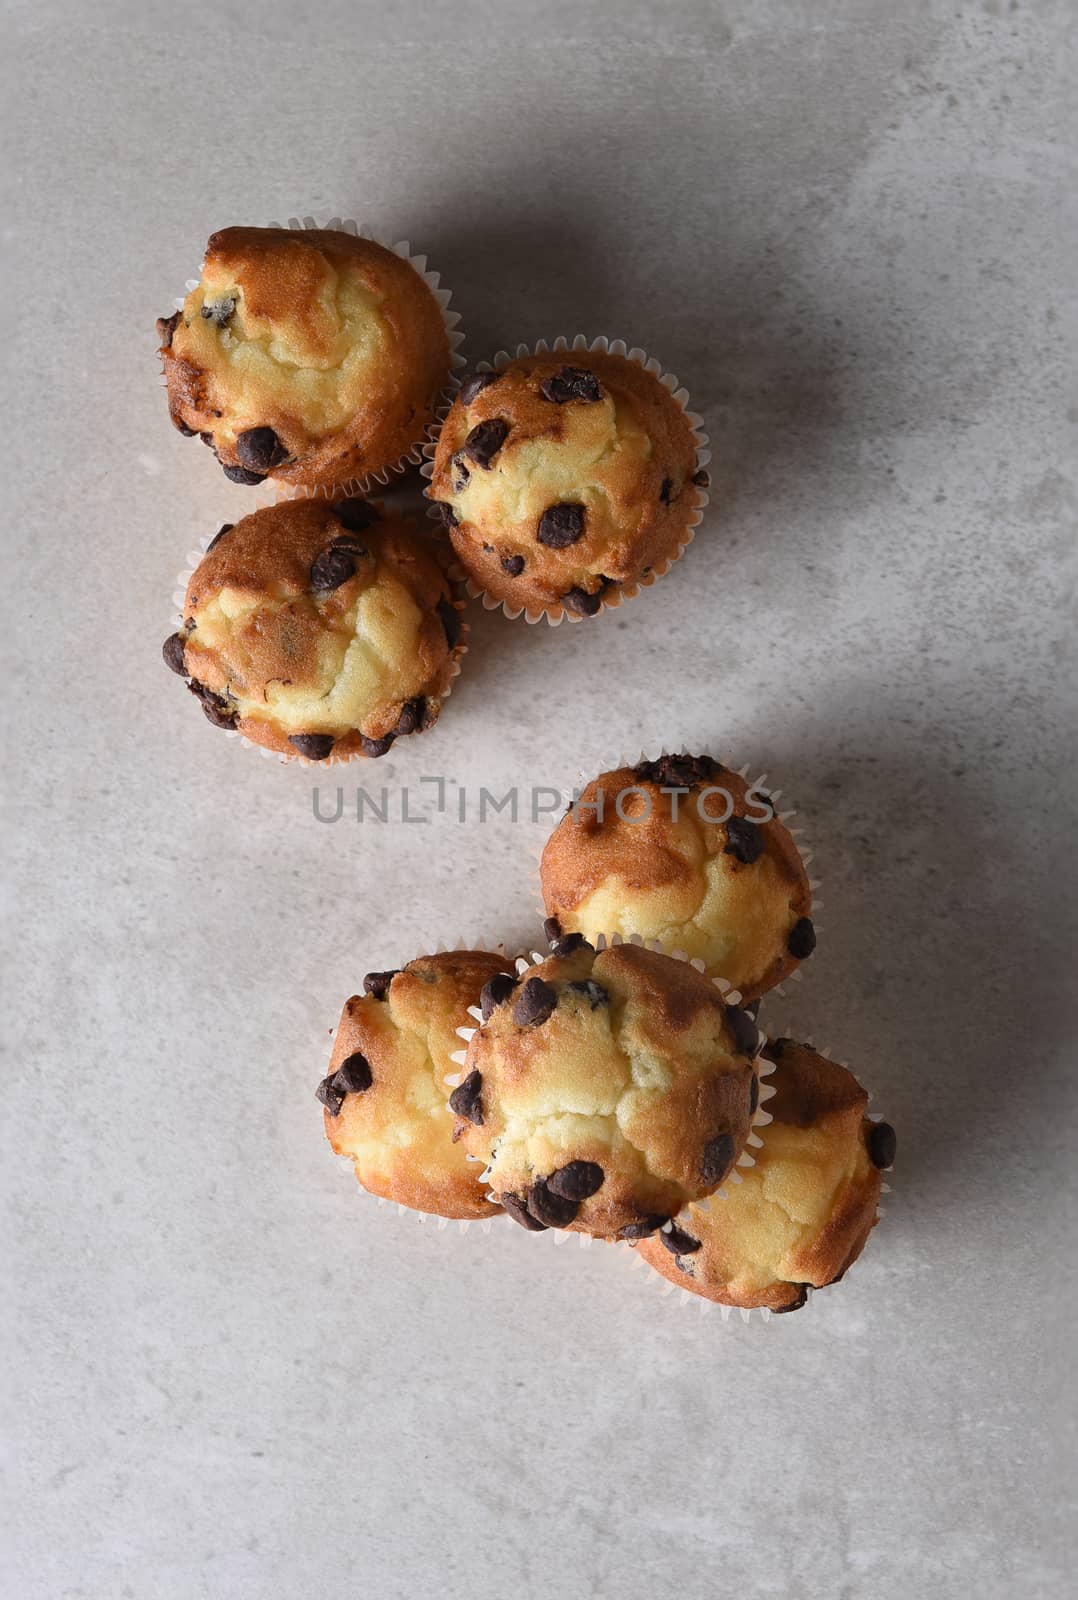 Top shot of a croup of fresh baked chocolate chip mini muffins by sCukrov